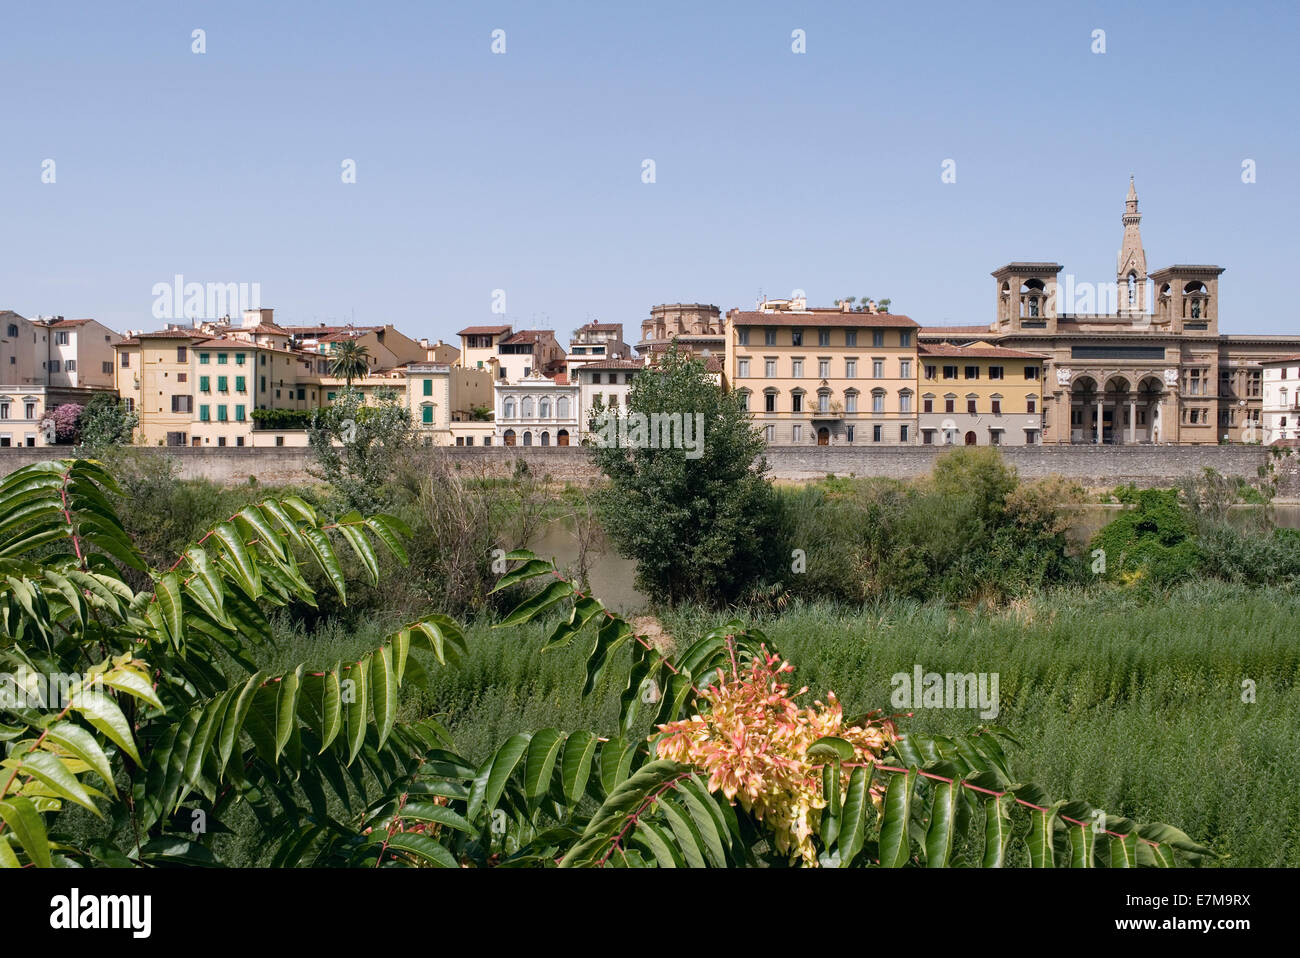 Vegetation along Arno River in Florence, Italy Stock Photo